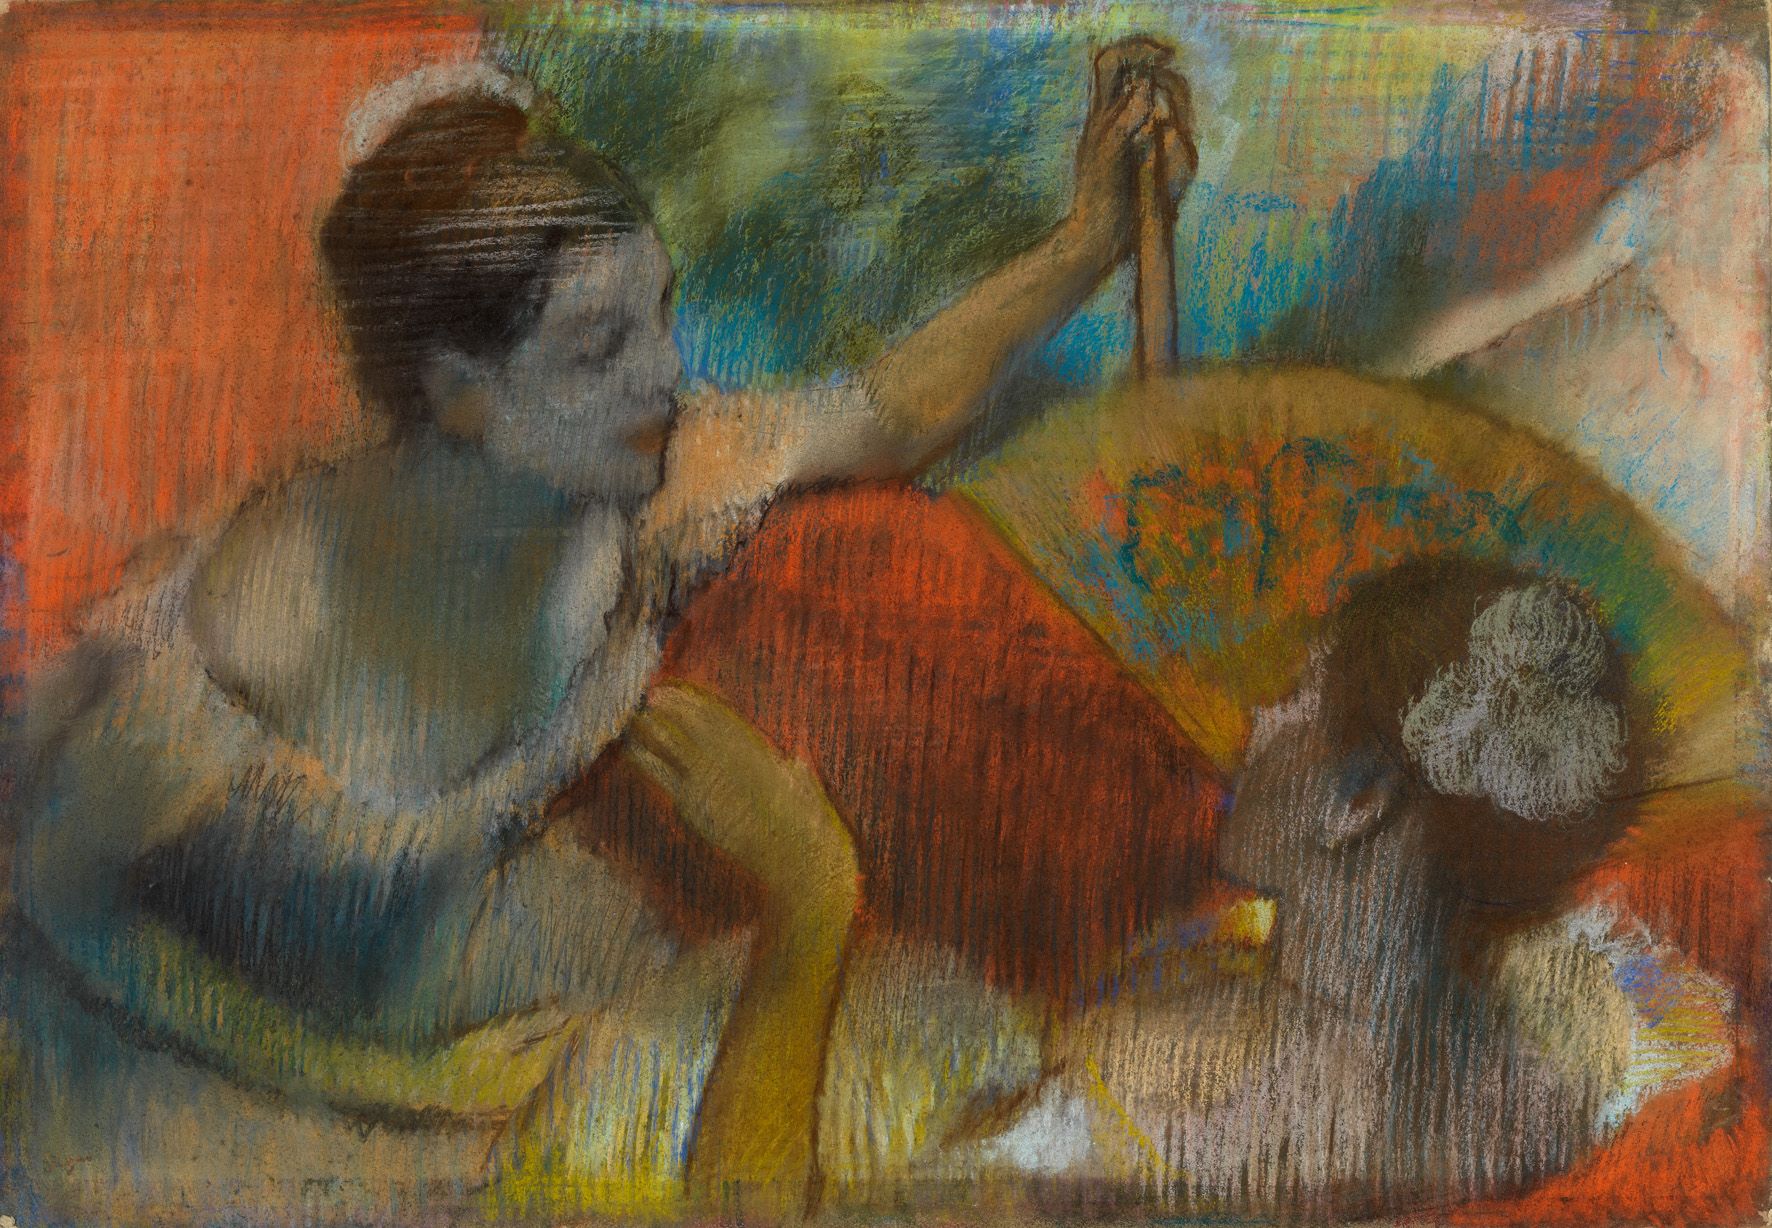 Hilaire-Germain-Edgar Degas Women in a Theatre Box about 1885-90 Pastel on paper 62.2 × 87 cm The Burrell Collection, Glasgow (35.231) © CSG CIC Glasgow Museums Collection